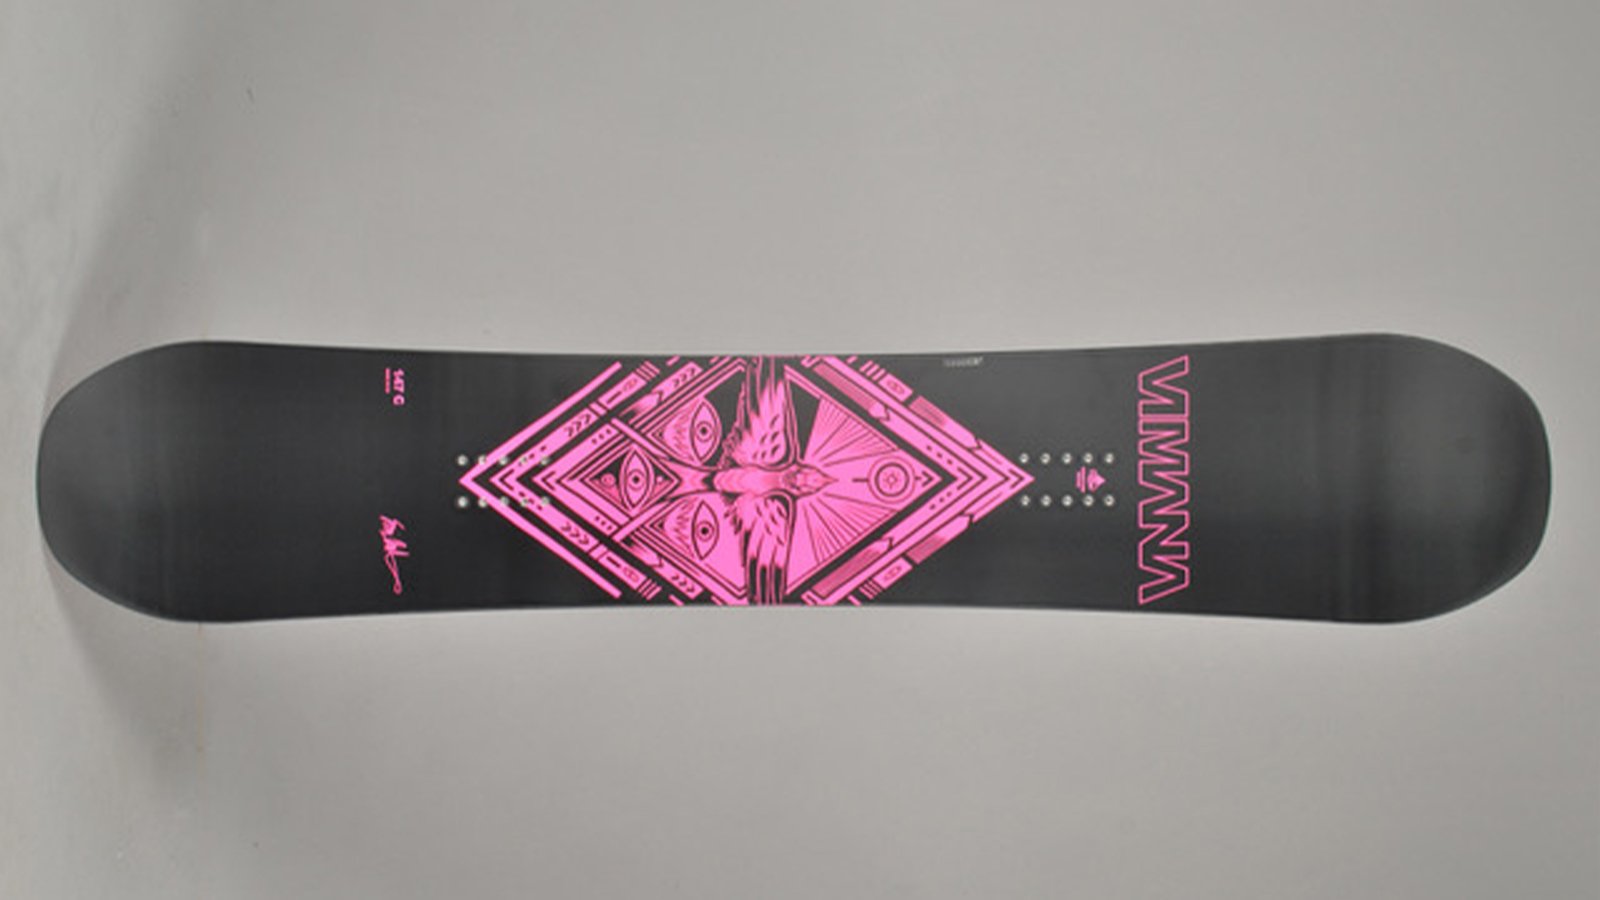 Vimana FW20/21 Snowboard Preview